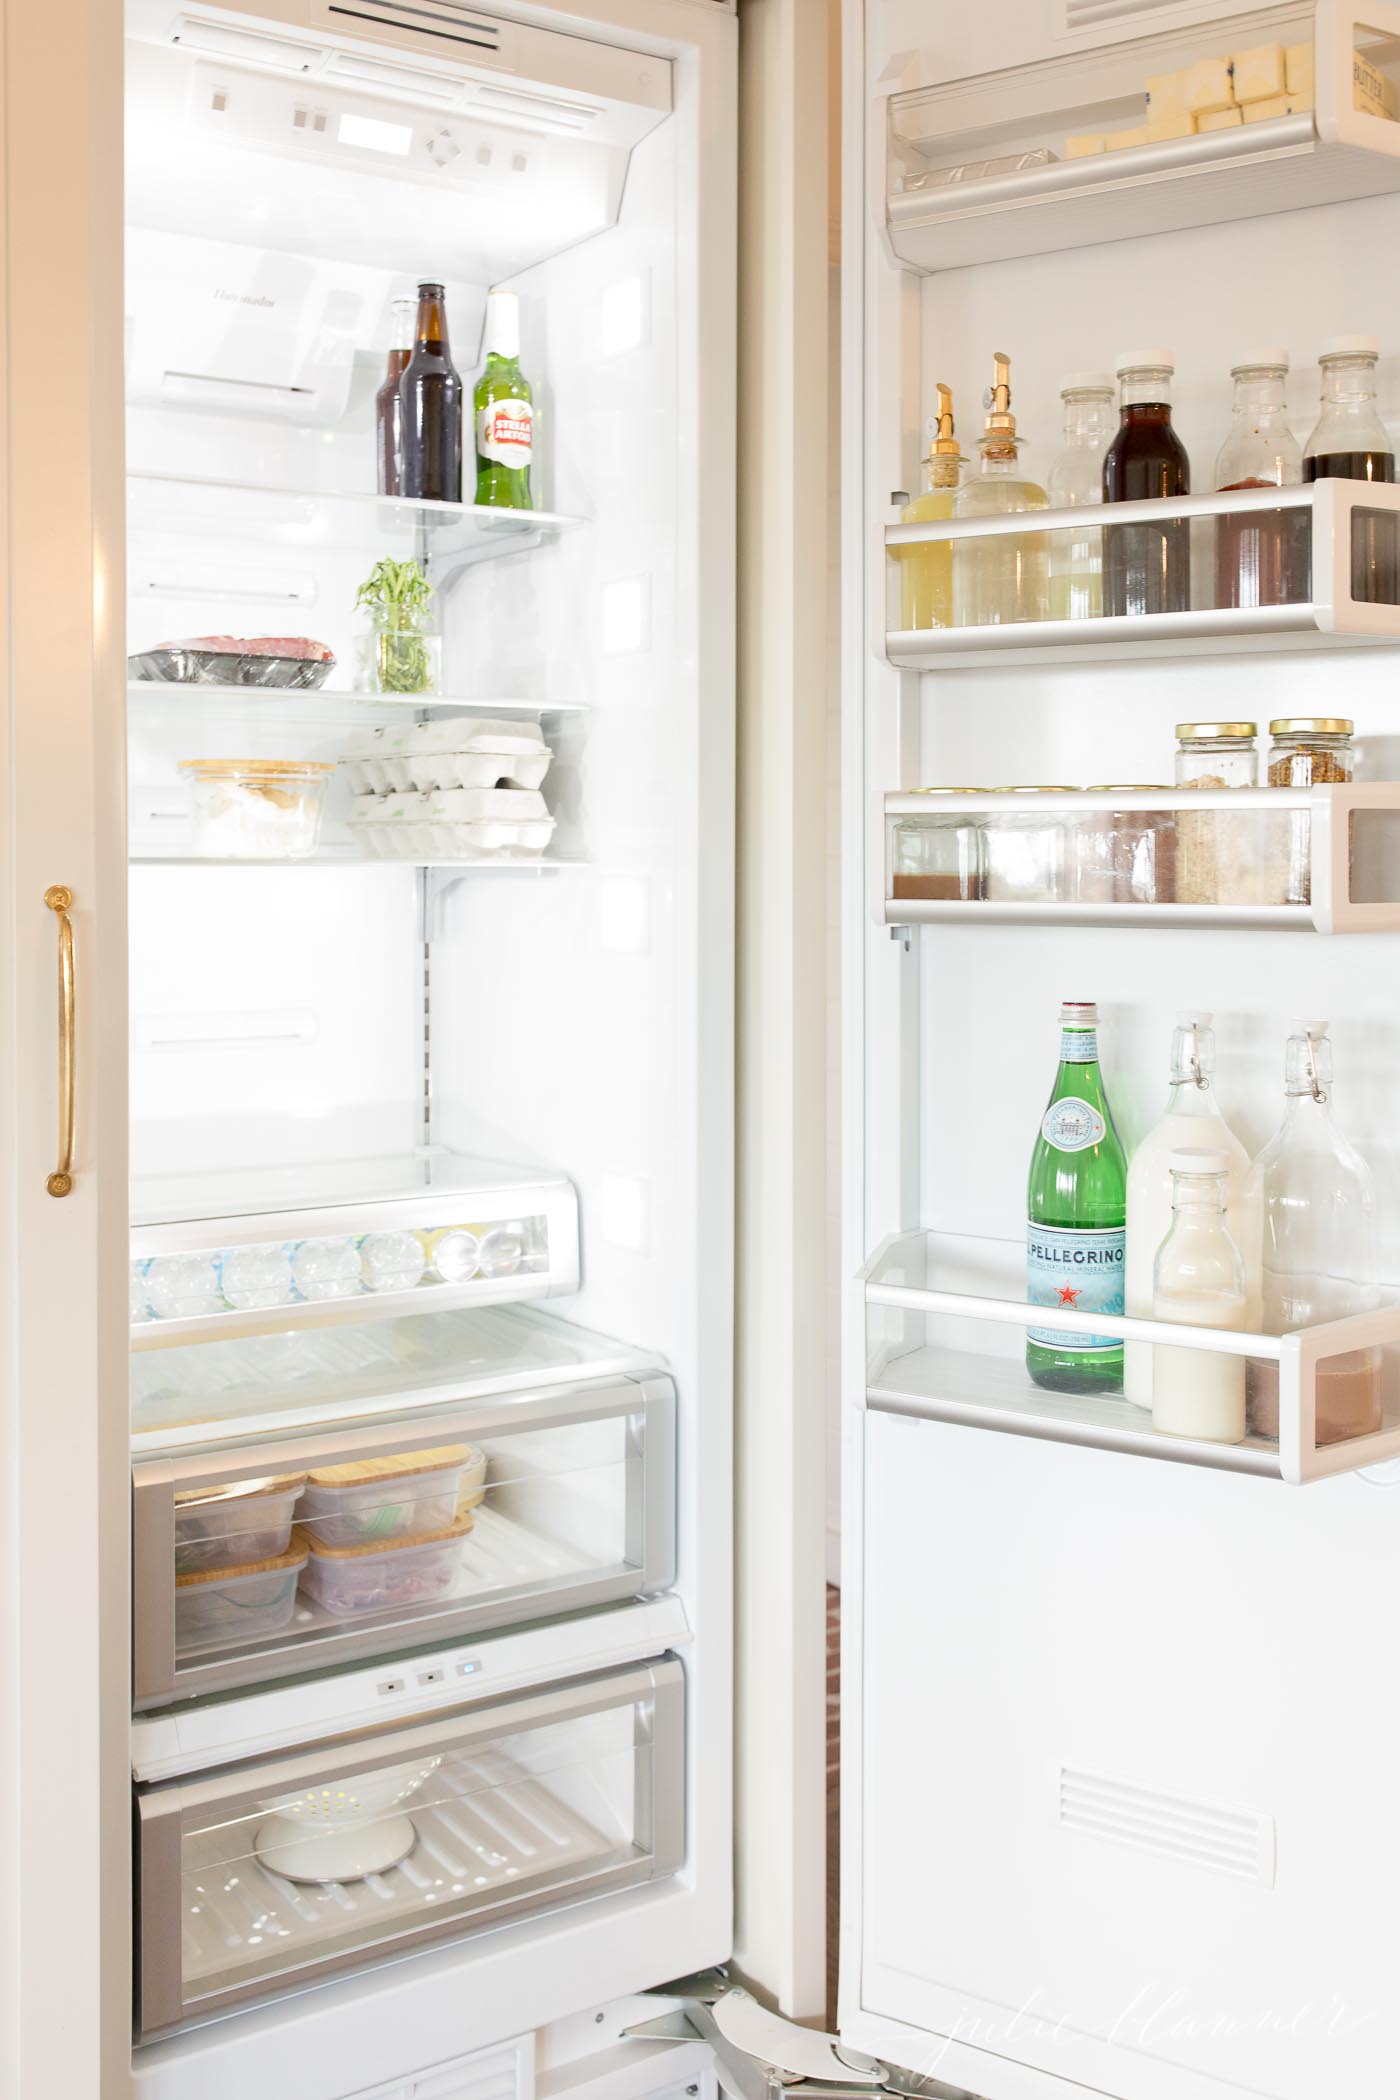 The inside of an organized refrigerator